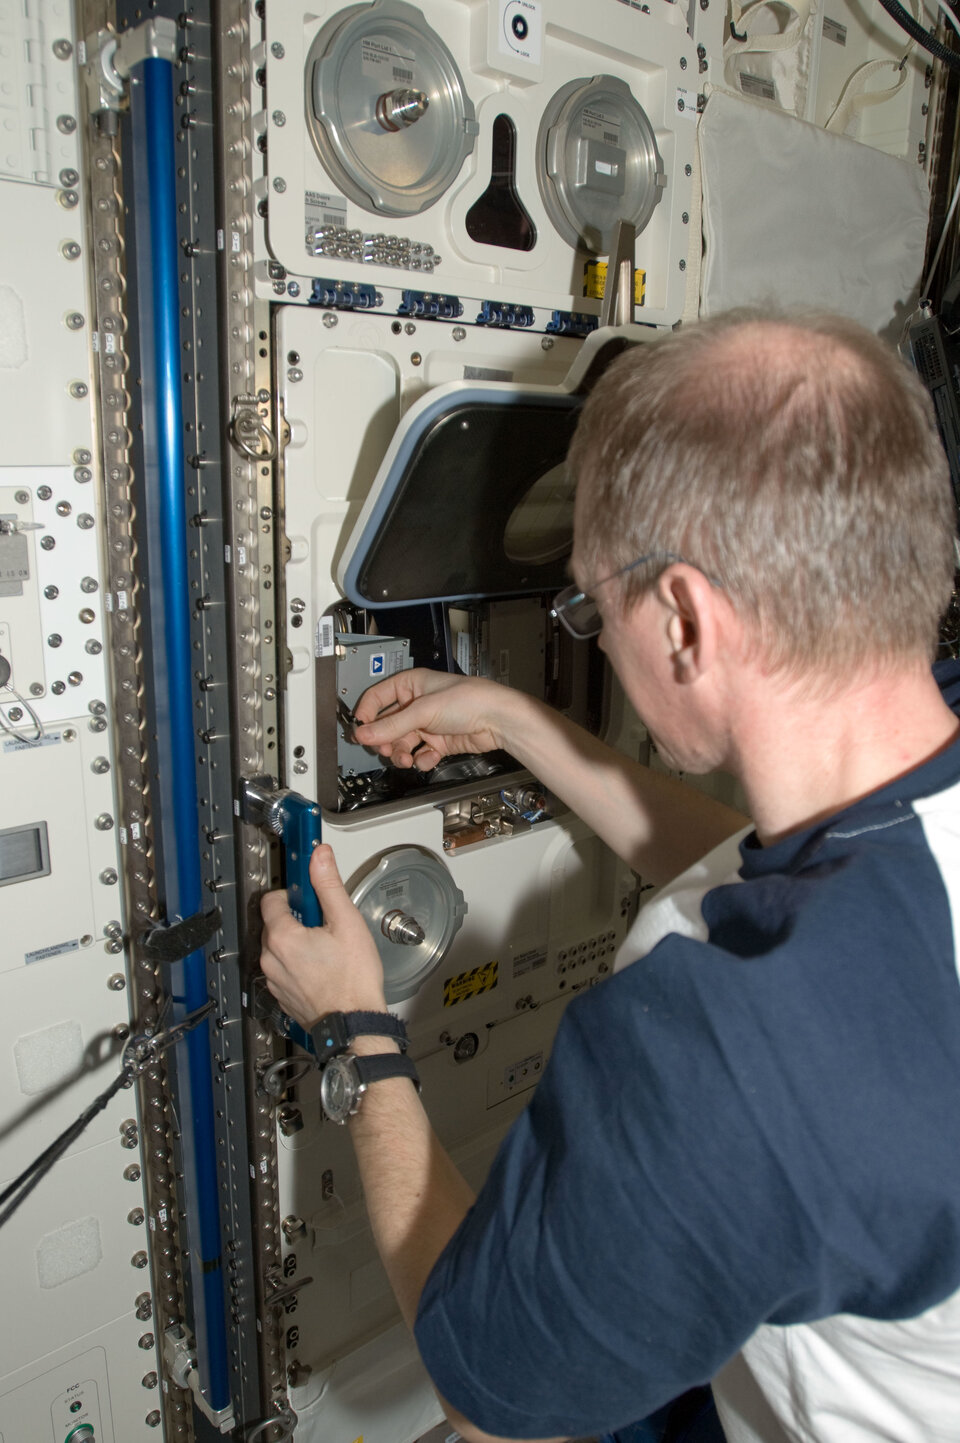 ESA's first Space Station commander Frank de Winne working on yeast experiment